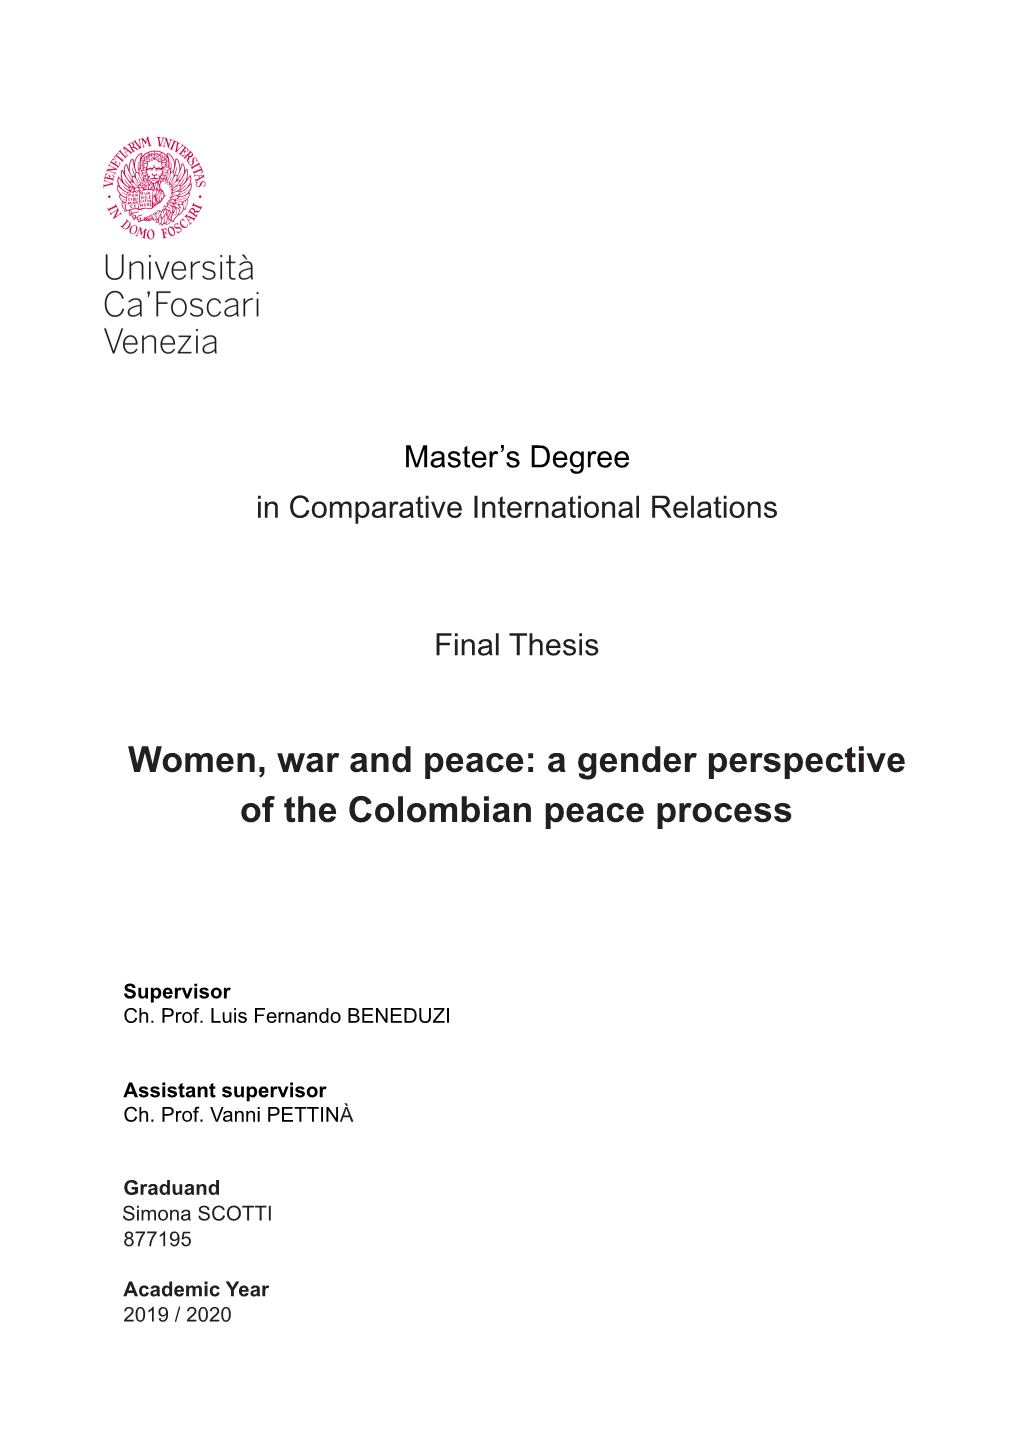 A Gender Perspective of the Colombian Peace Process